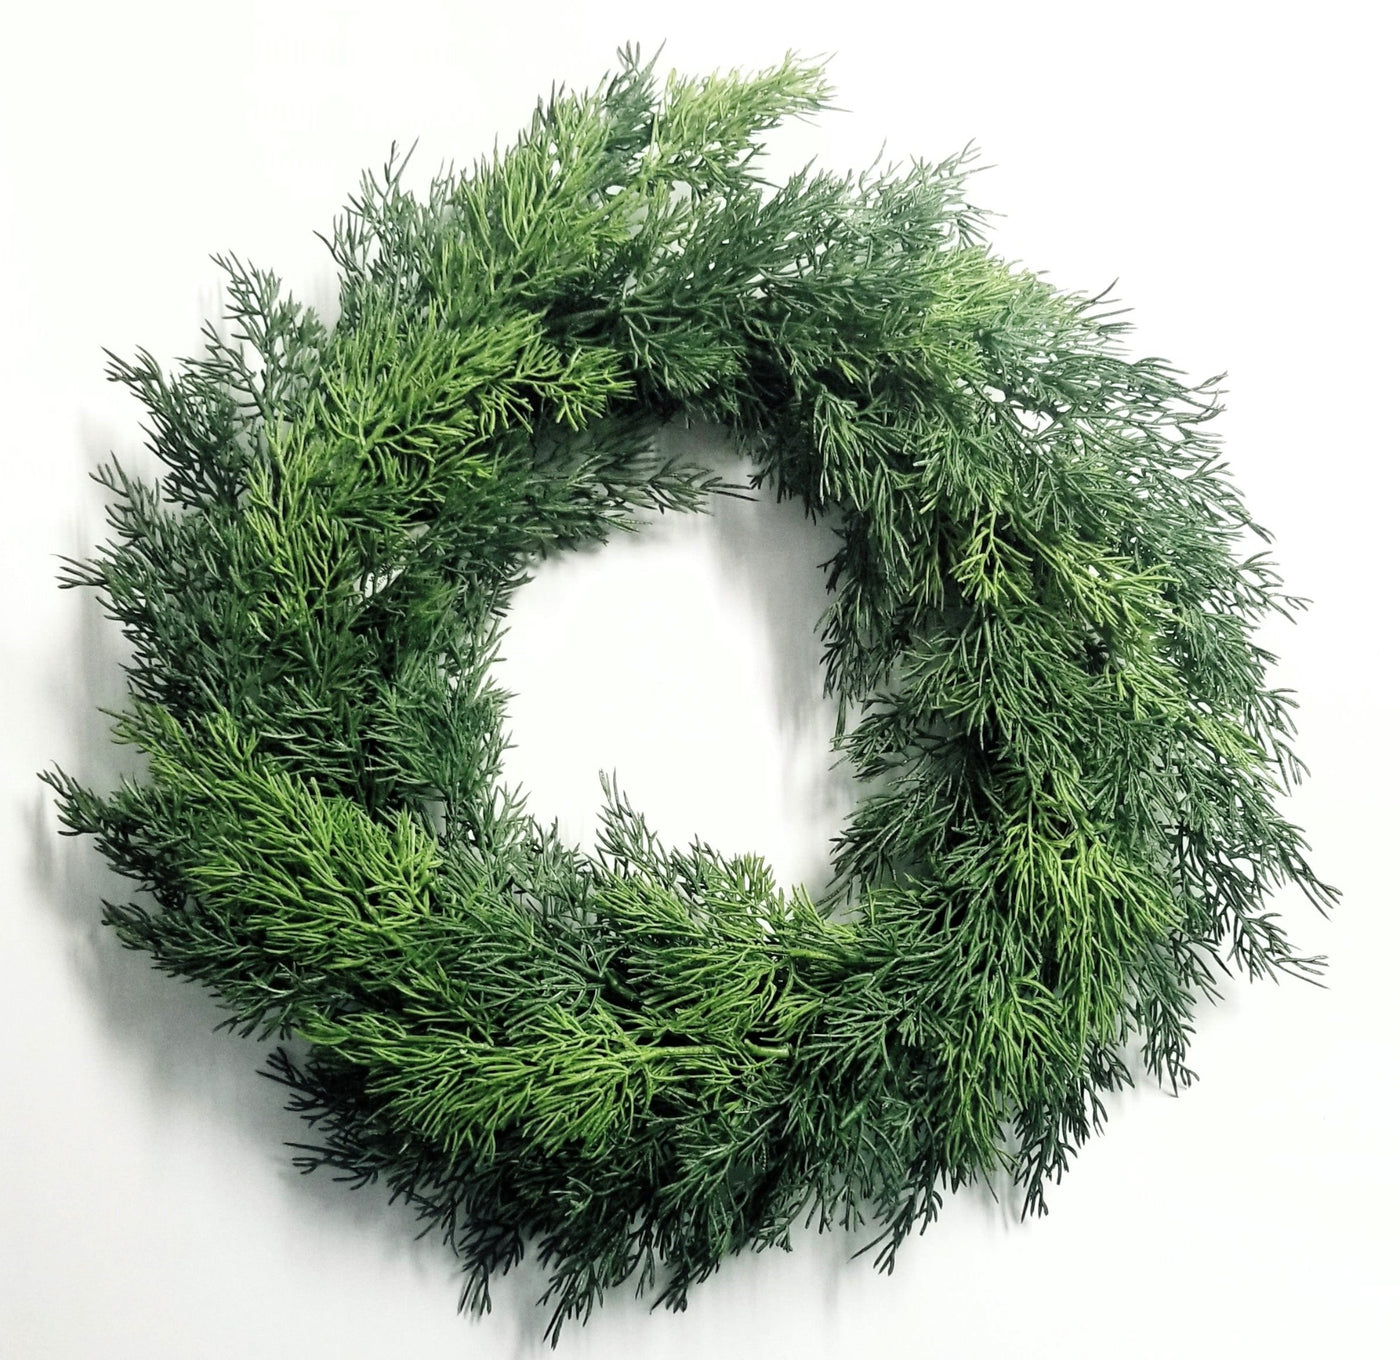 Fresh Touch Cedar Wreath 20": Faux greenery. Add to walls, doors and spaces in need of some holiday cheer